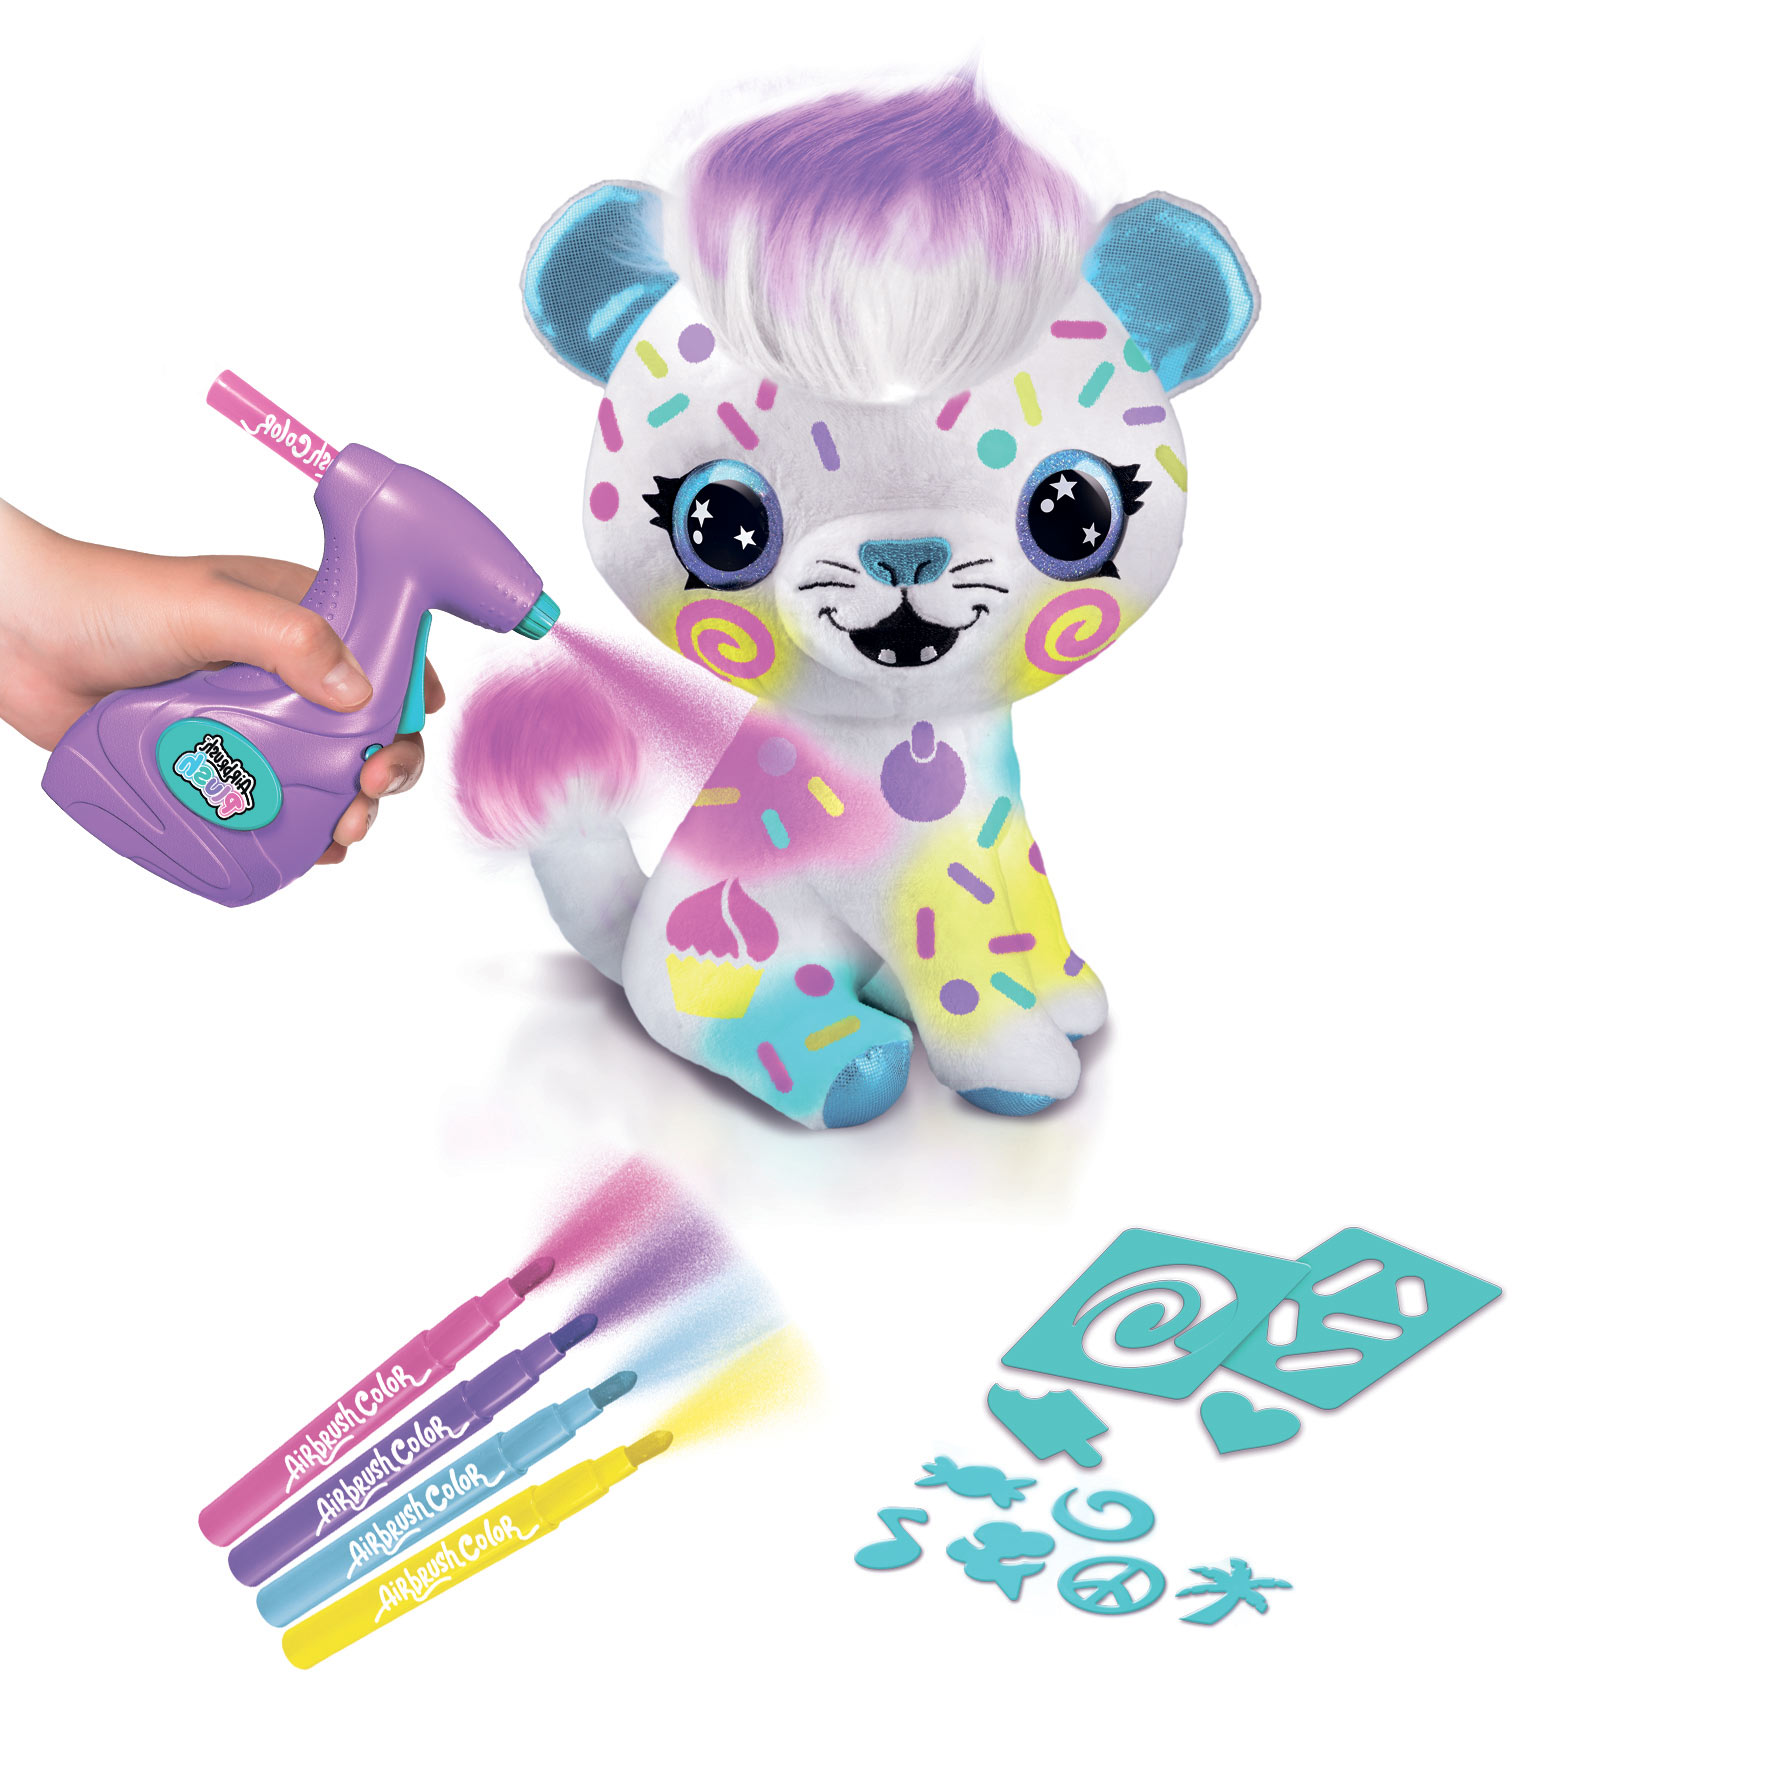 Canal Toys Personalize Airbrush Plush Large Kitty! Decorate, wash, Repeat!  Customize Your own Spray Art Plush with Markers, Battery Powered Airbrush